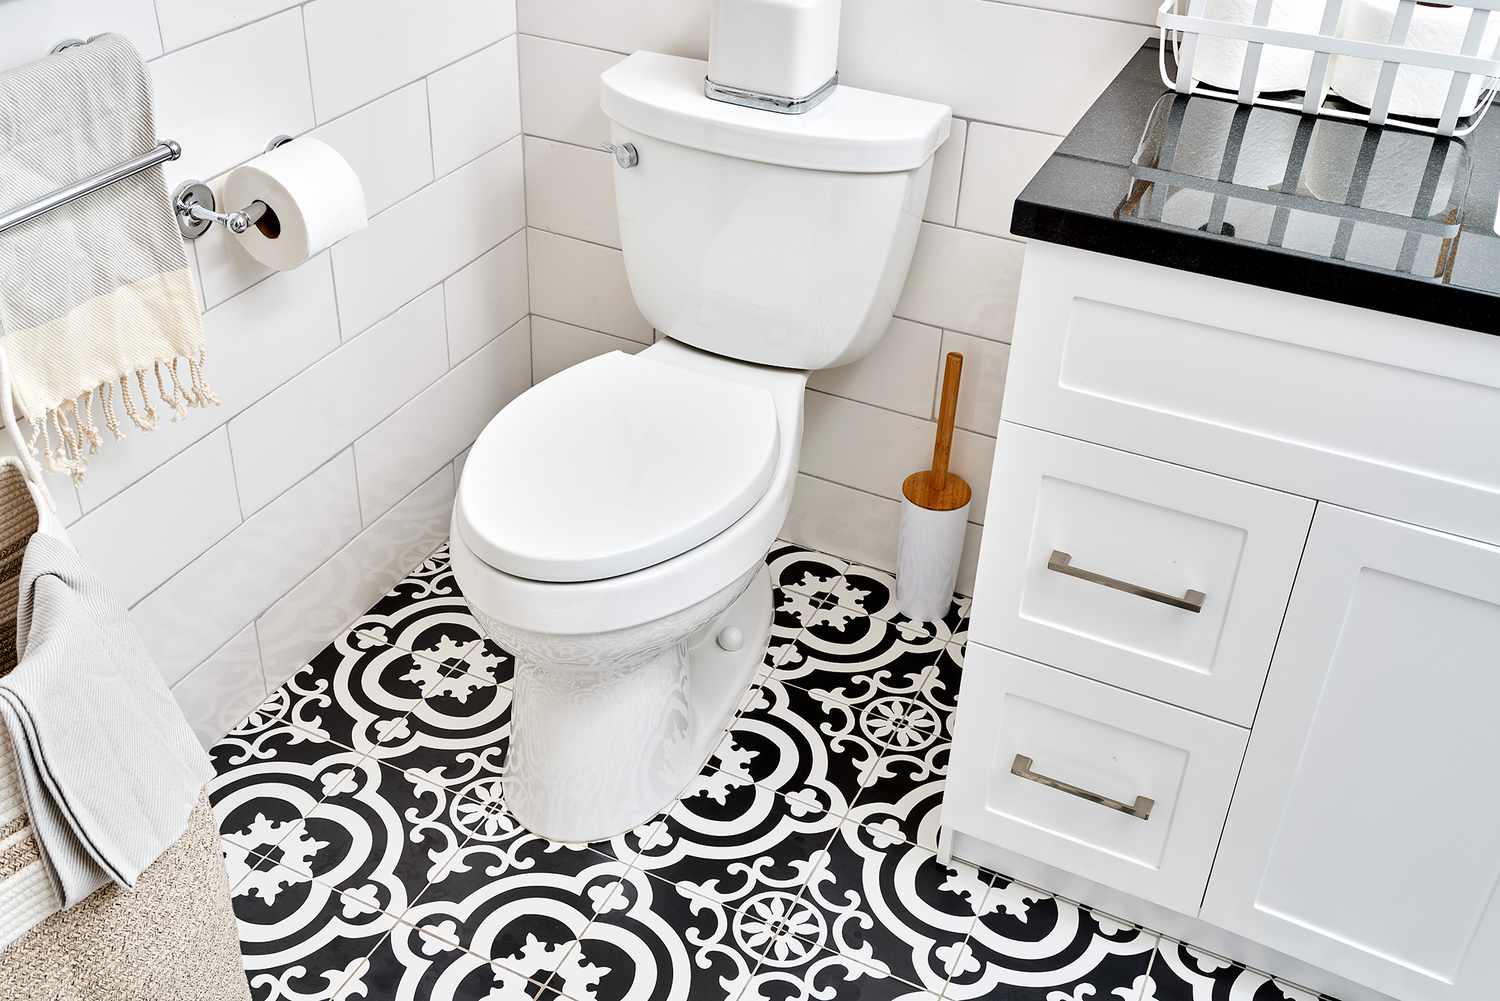 Standard gravity-flush toilet surrounded by black and white patterned tile floor in bathroom